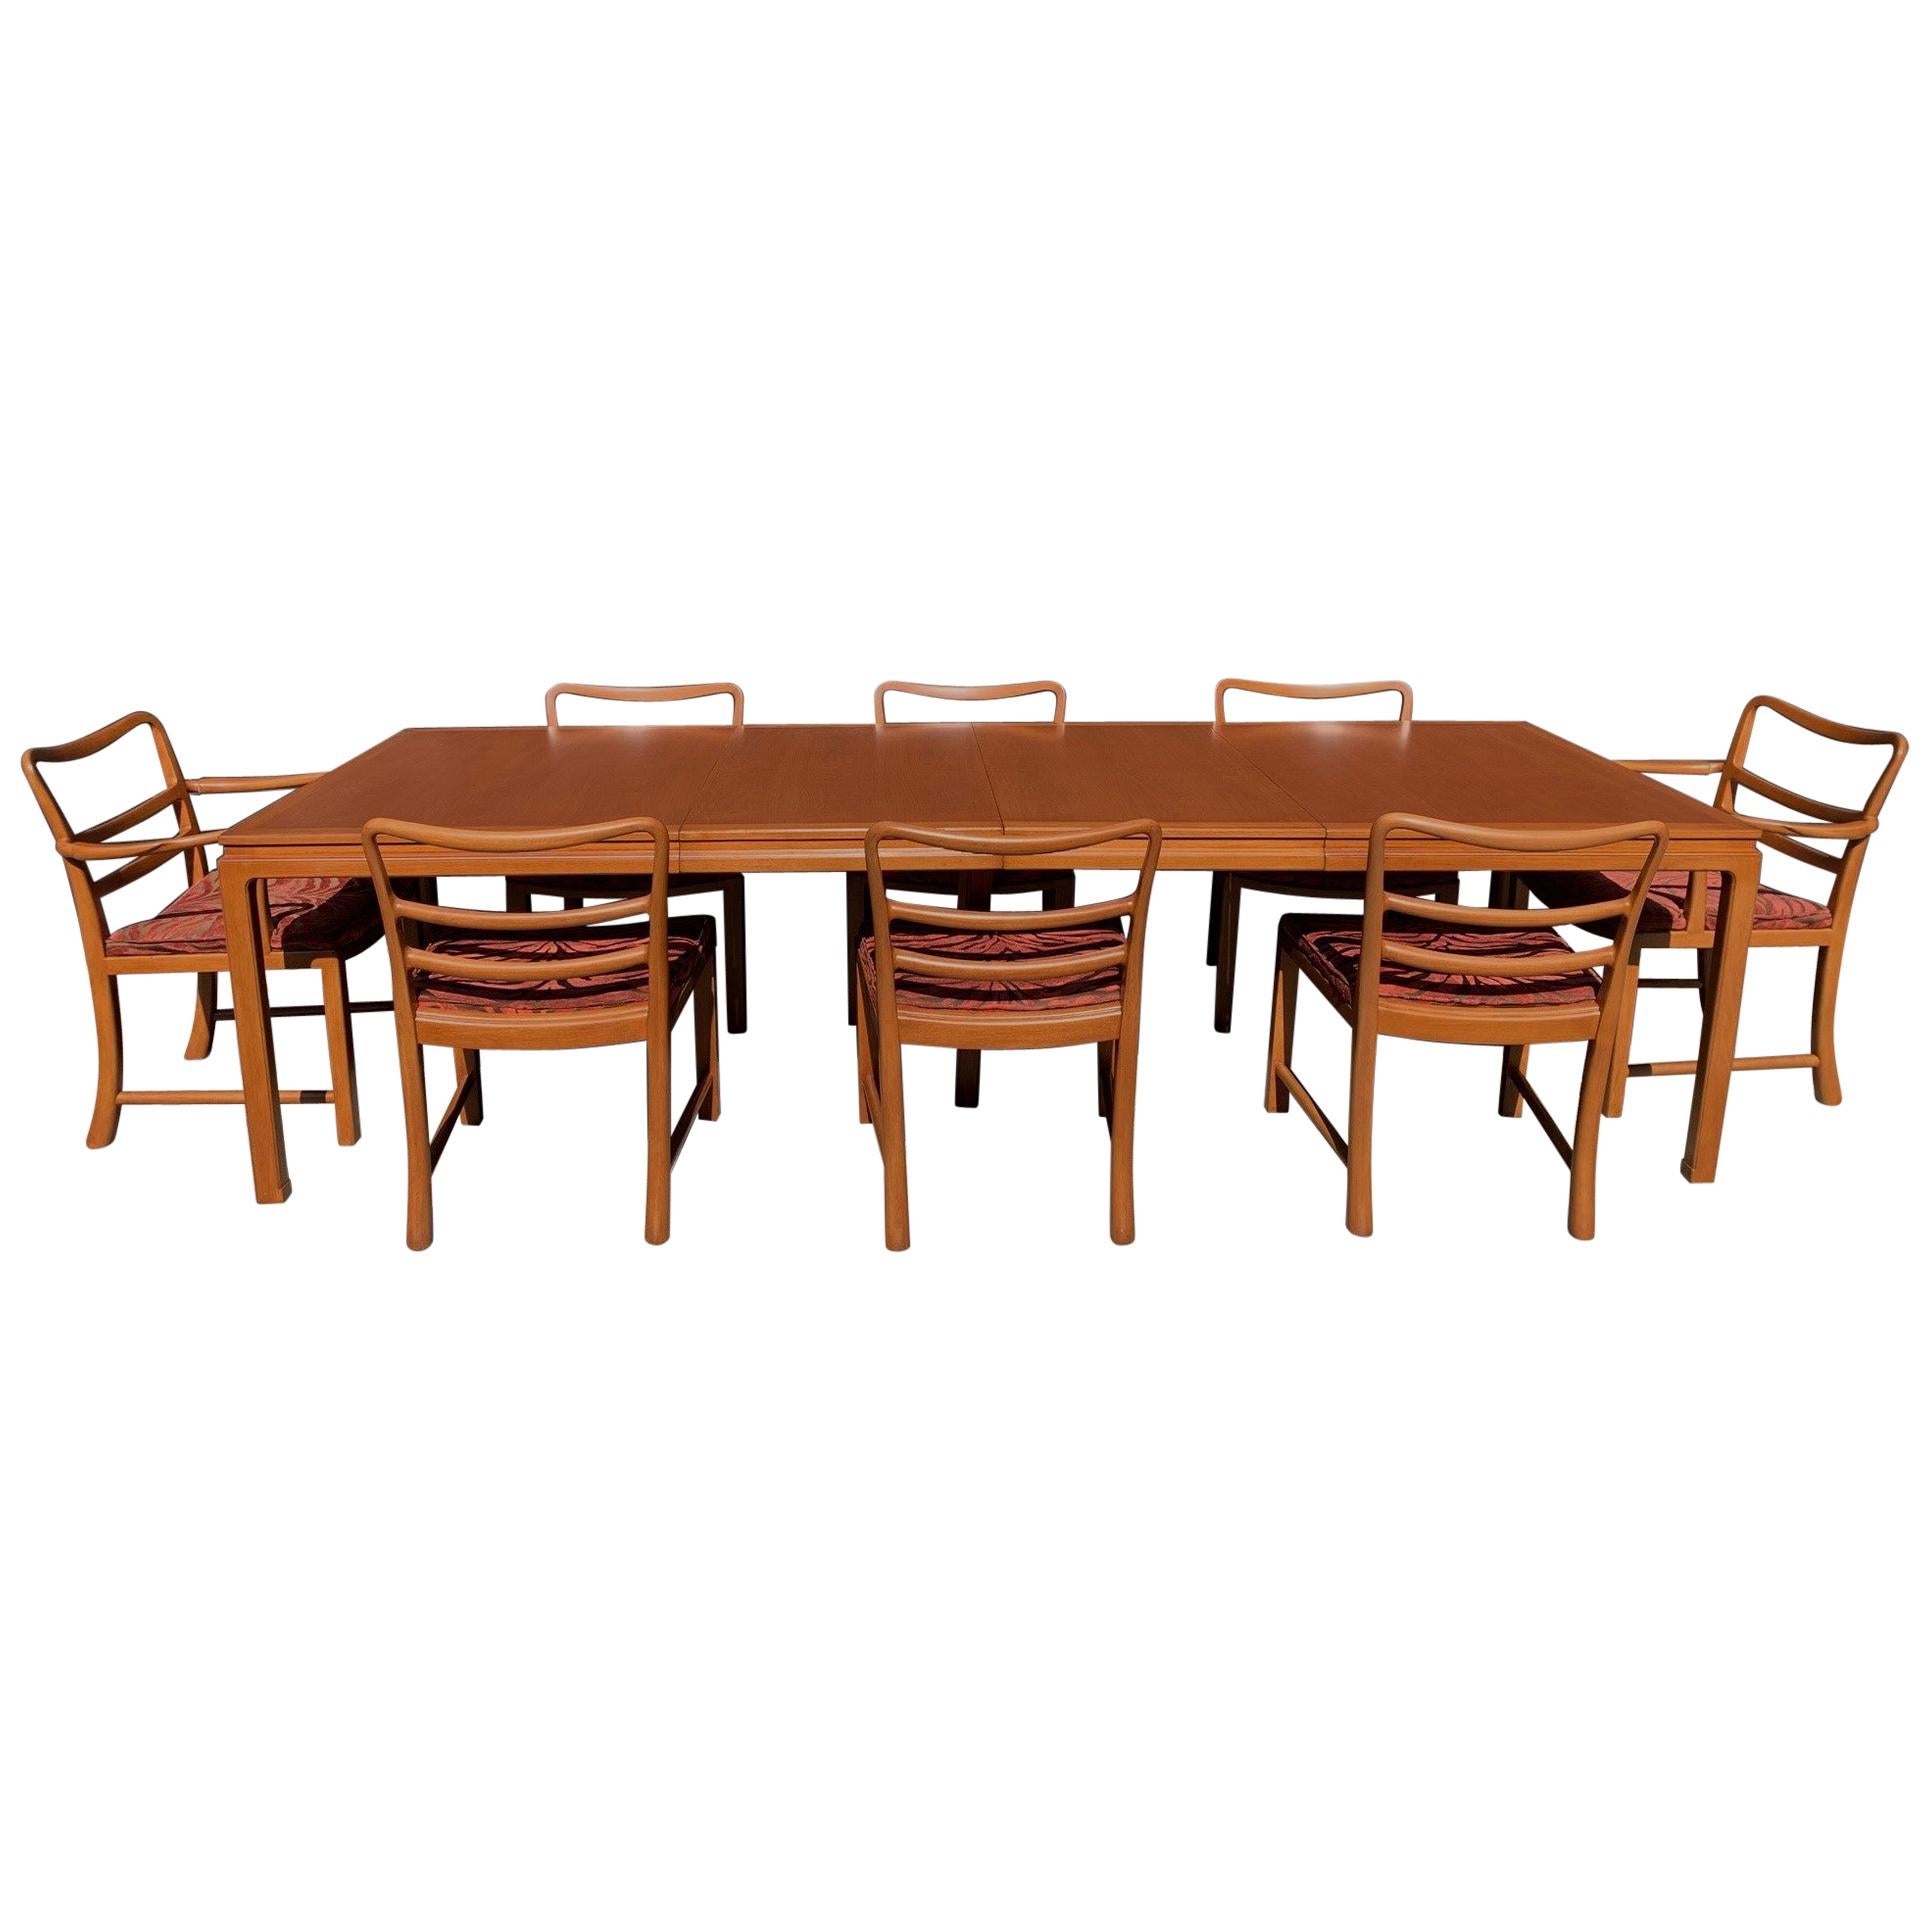 Edward Wormley Dunbar Dining Table with Eight Chairs and Two Extensions Leaves